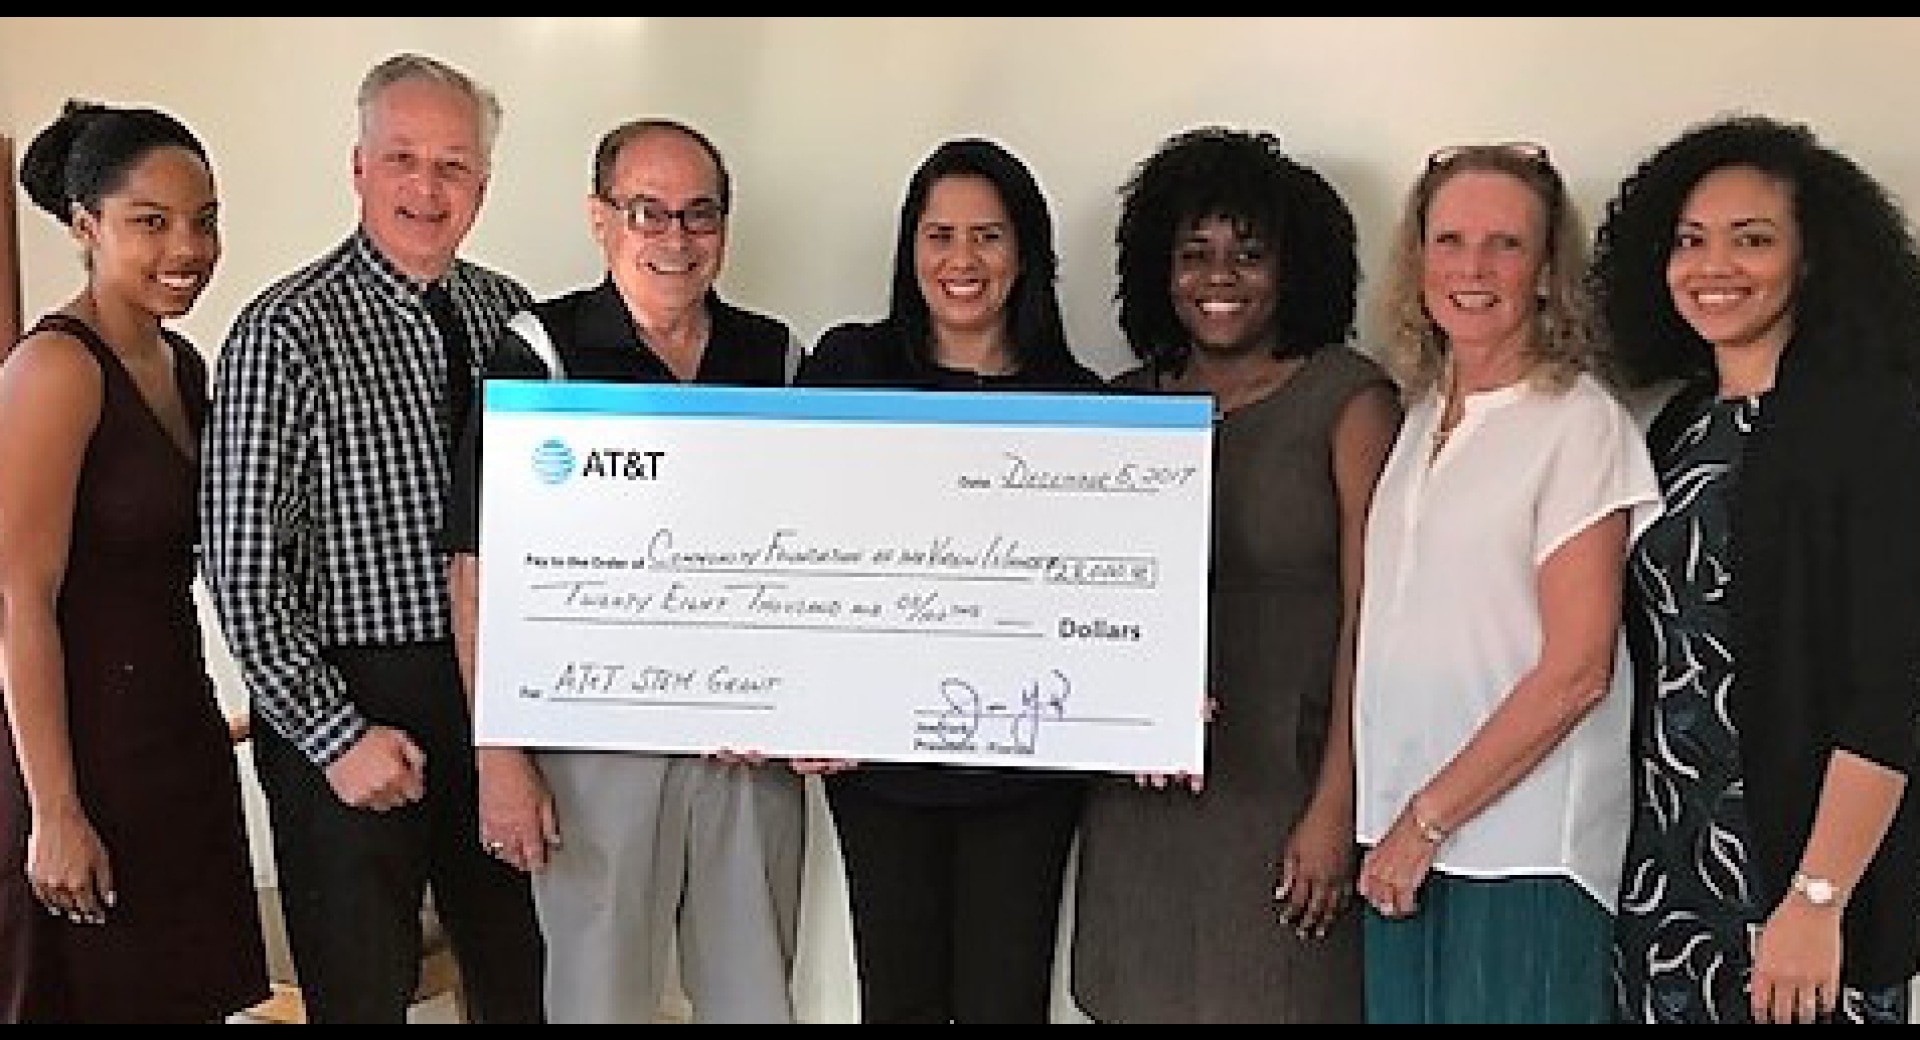 CFVI Announces $28,000 Contribution from AT&T to Promote STEM Education Projects